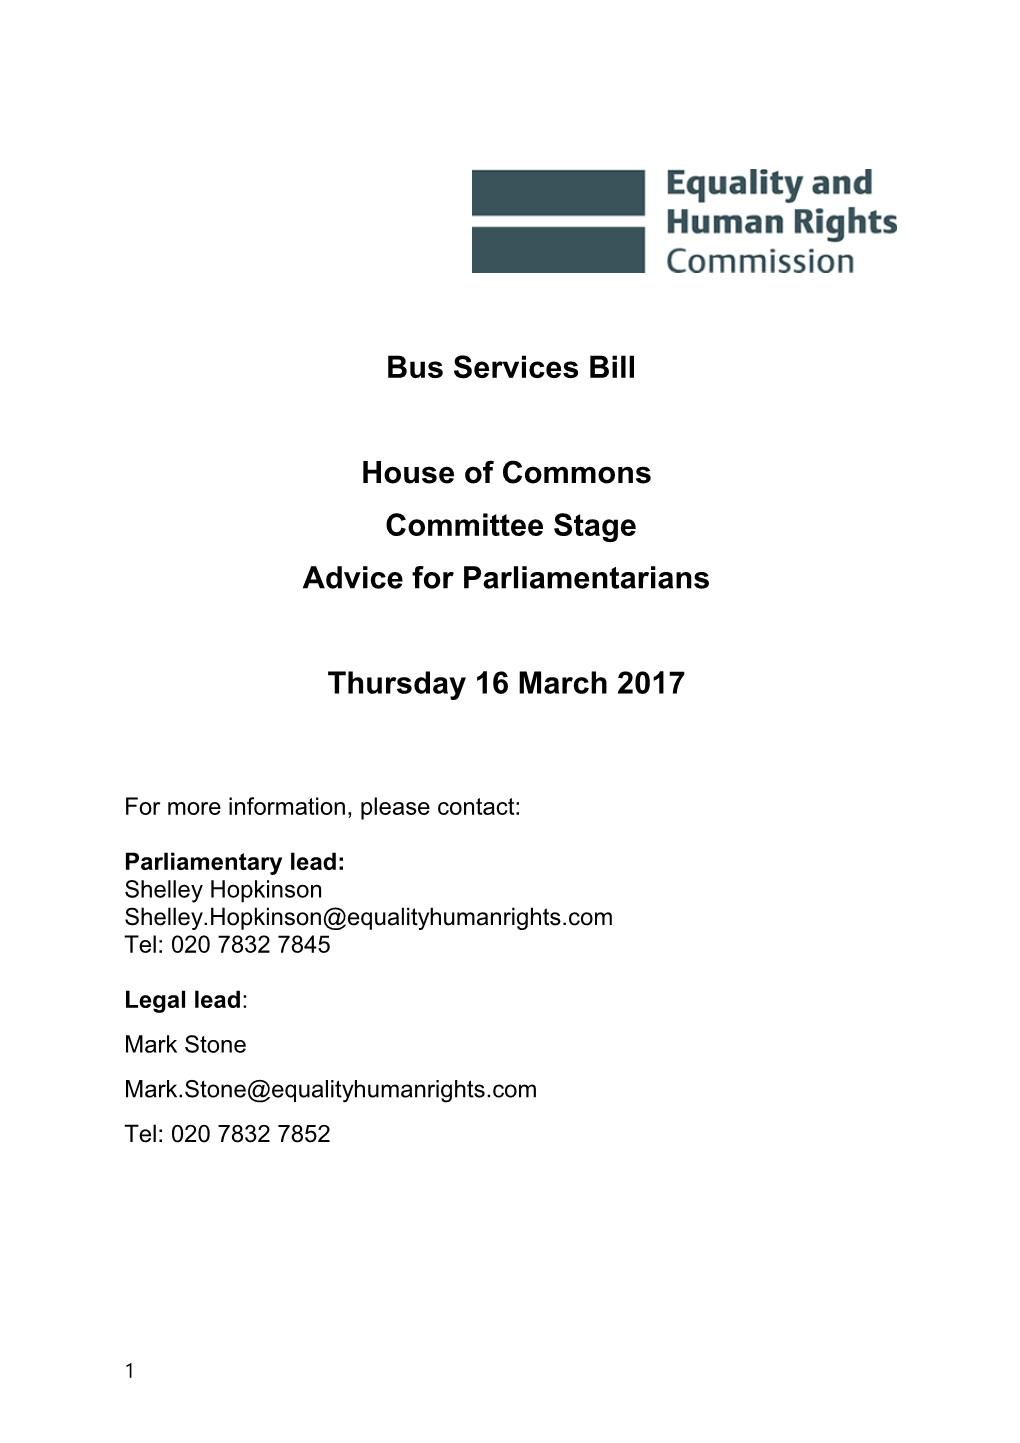 Bus Services Bill